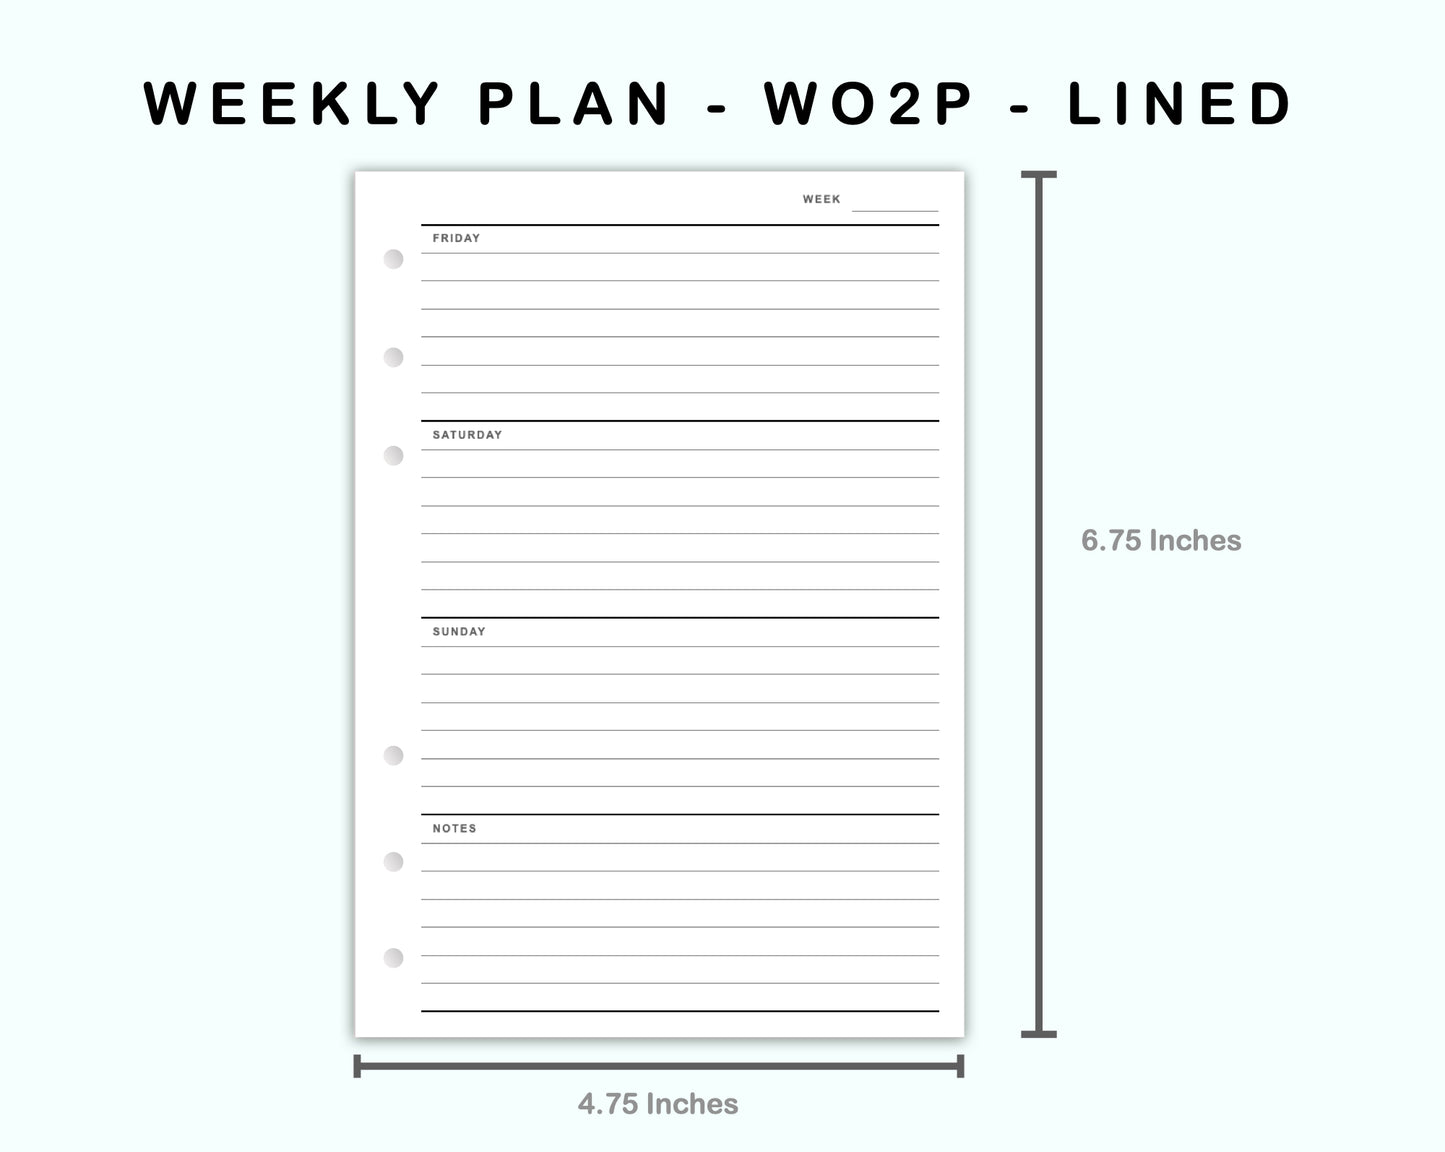 Personal Wide Inserts - Weekly Plan - WO2P - Lined